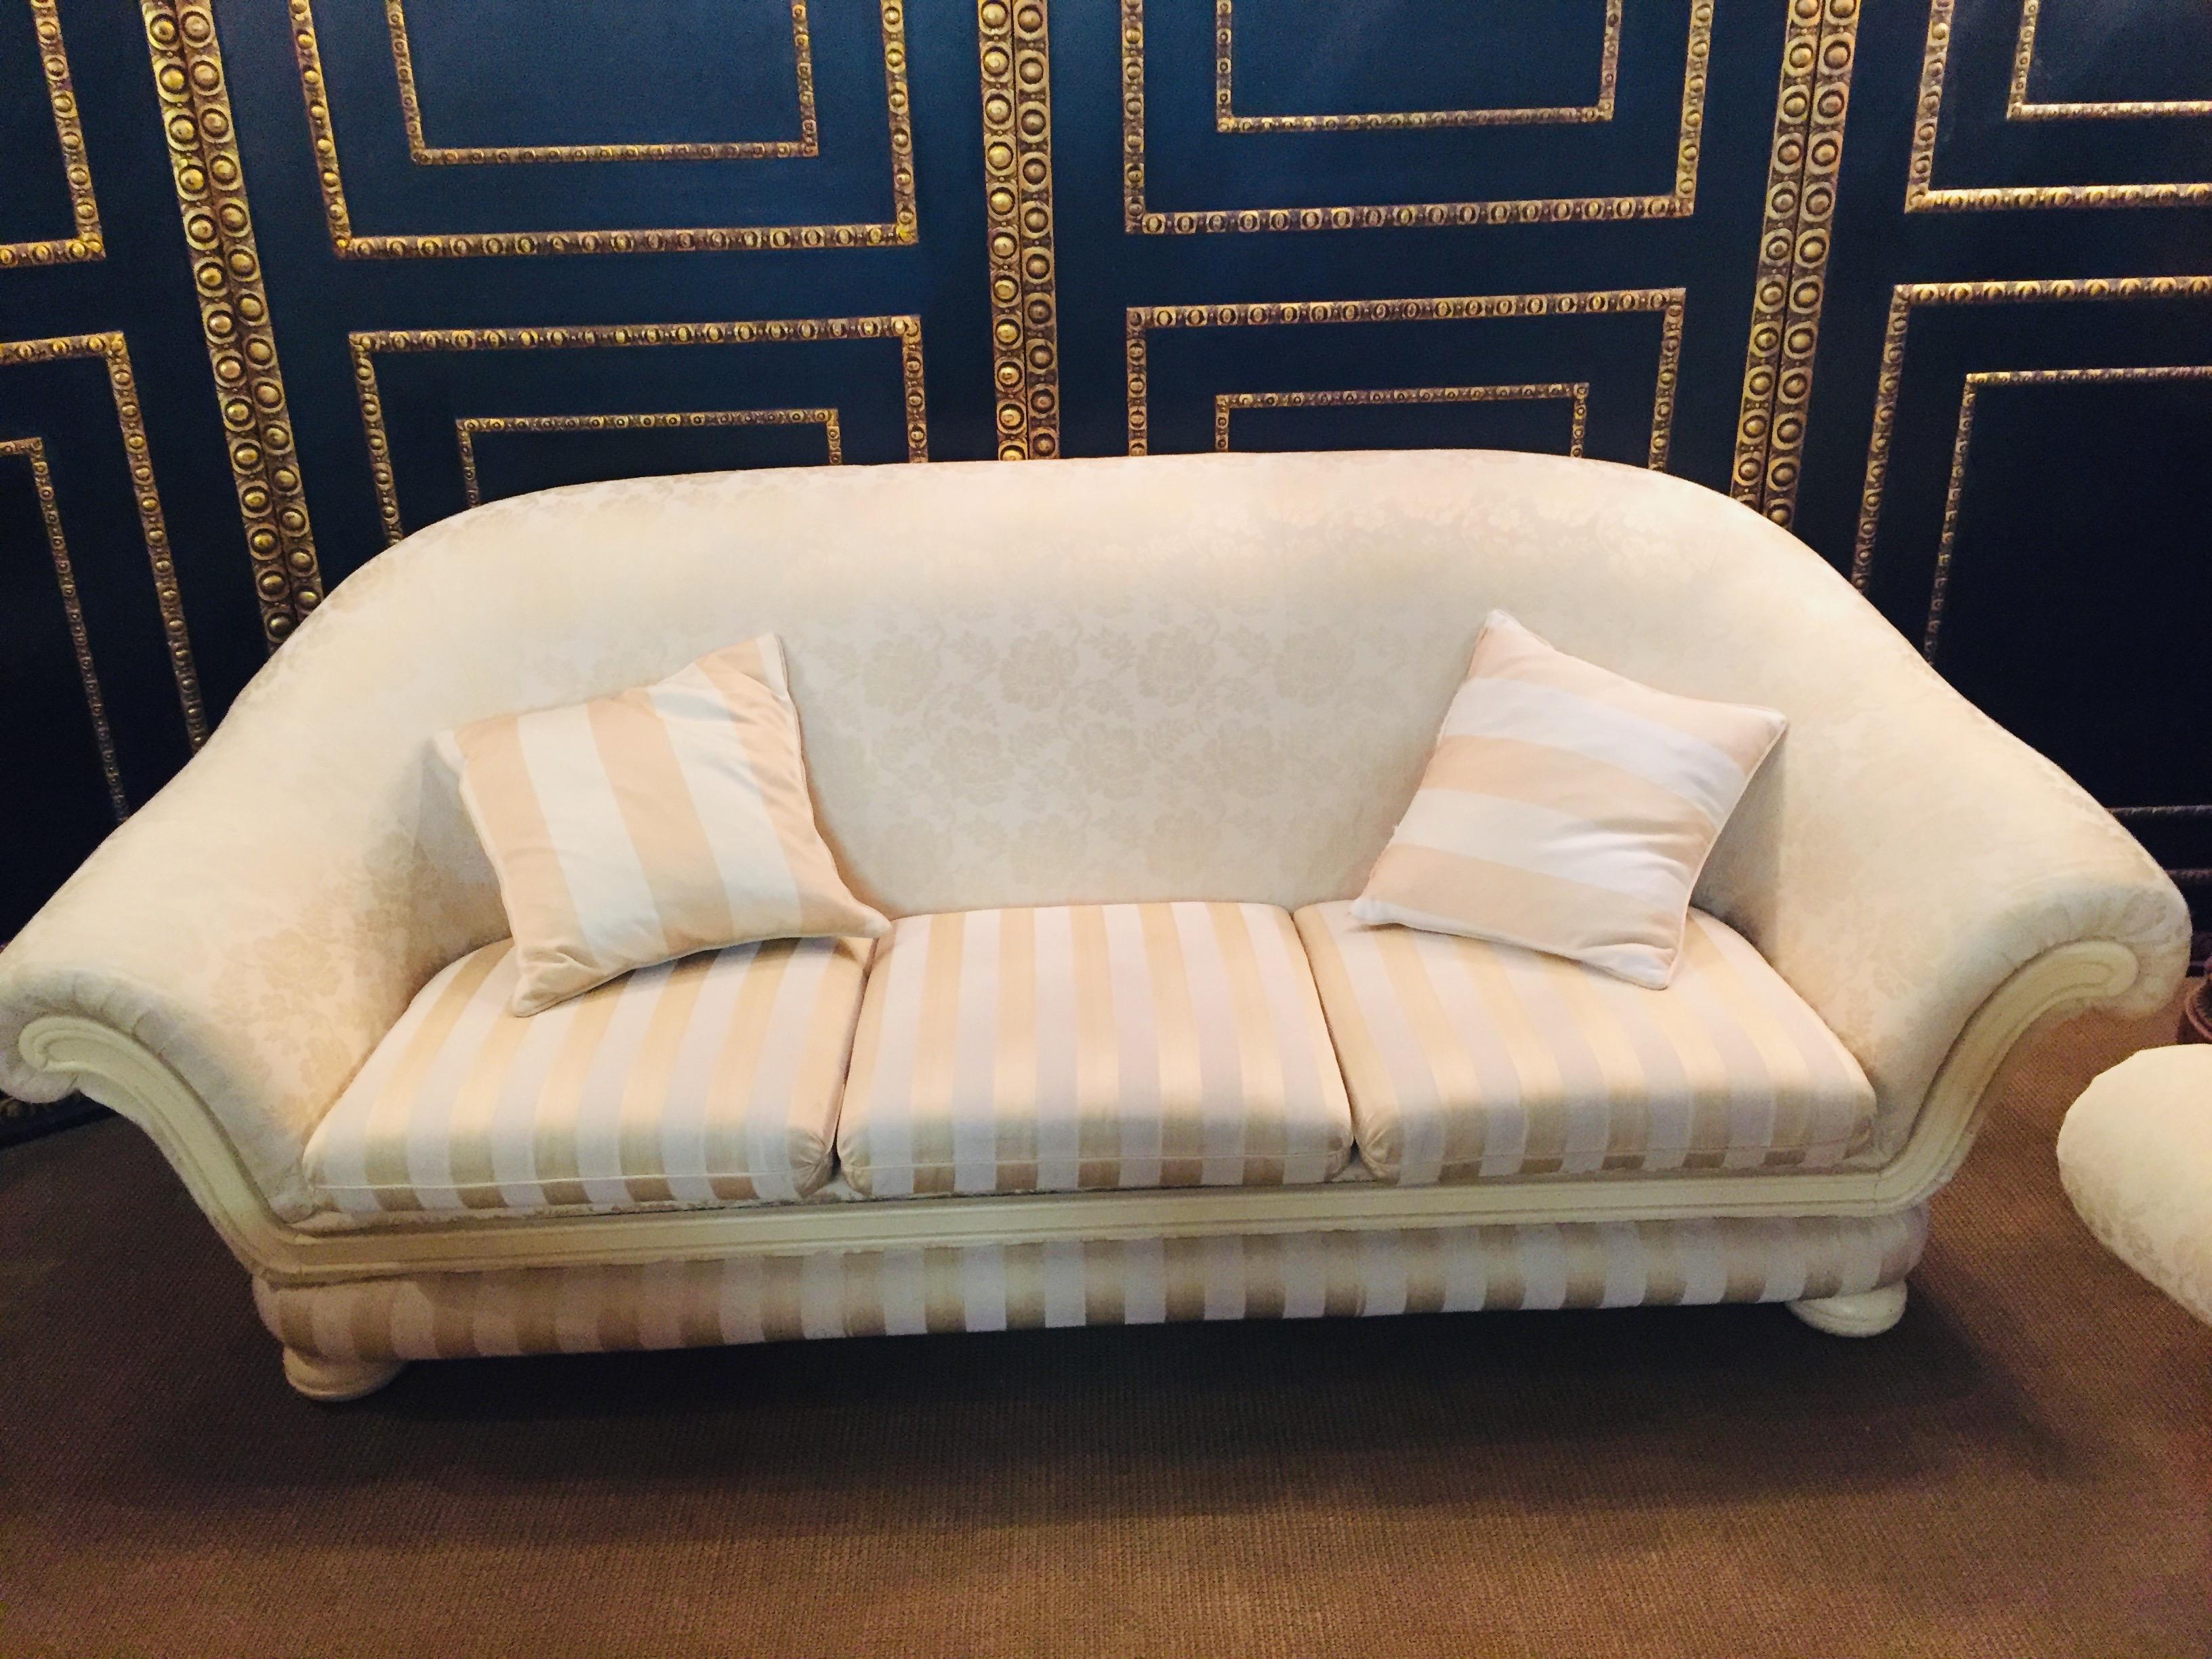 This set is a very high-quality upholstery from a Berlin Villa.
curved armrests front with solid wood decorated in white / beige.
Beautiful Baroque pattern on the seats with striped fabric.

the set is in a super condition, no stains or wear.
The